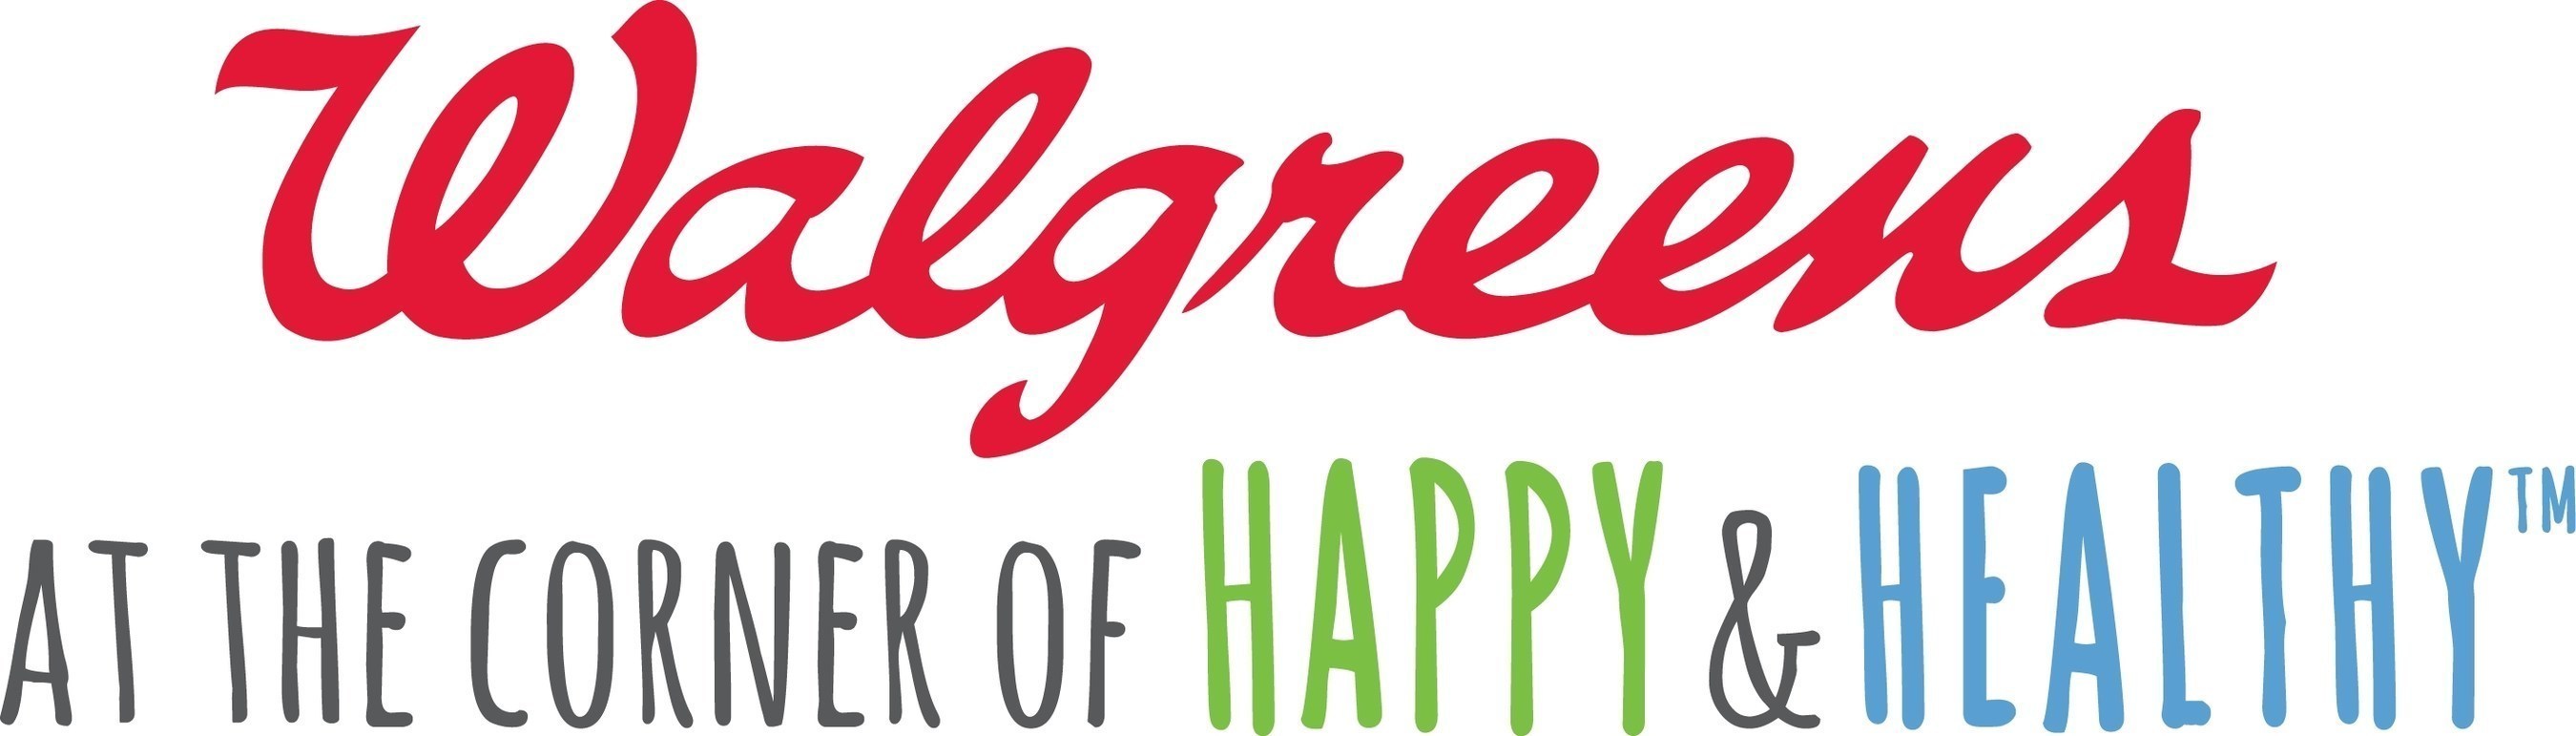 As the exclusive retail partner of the first Red Nose Day to be celebrated in America, Walgreens is raising funds to benefit children and young people in poverty and champion their right to be happy and healthy.